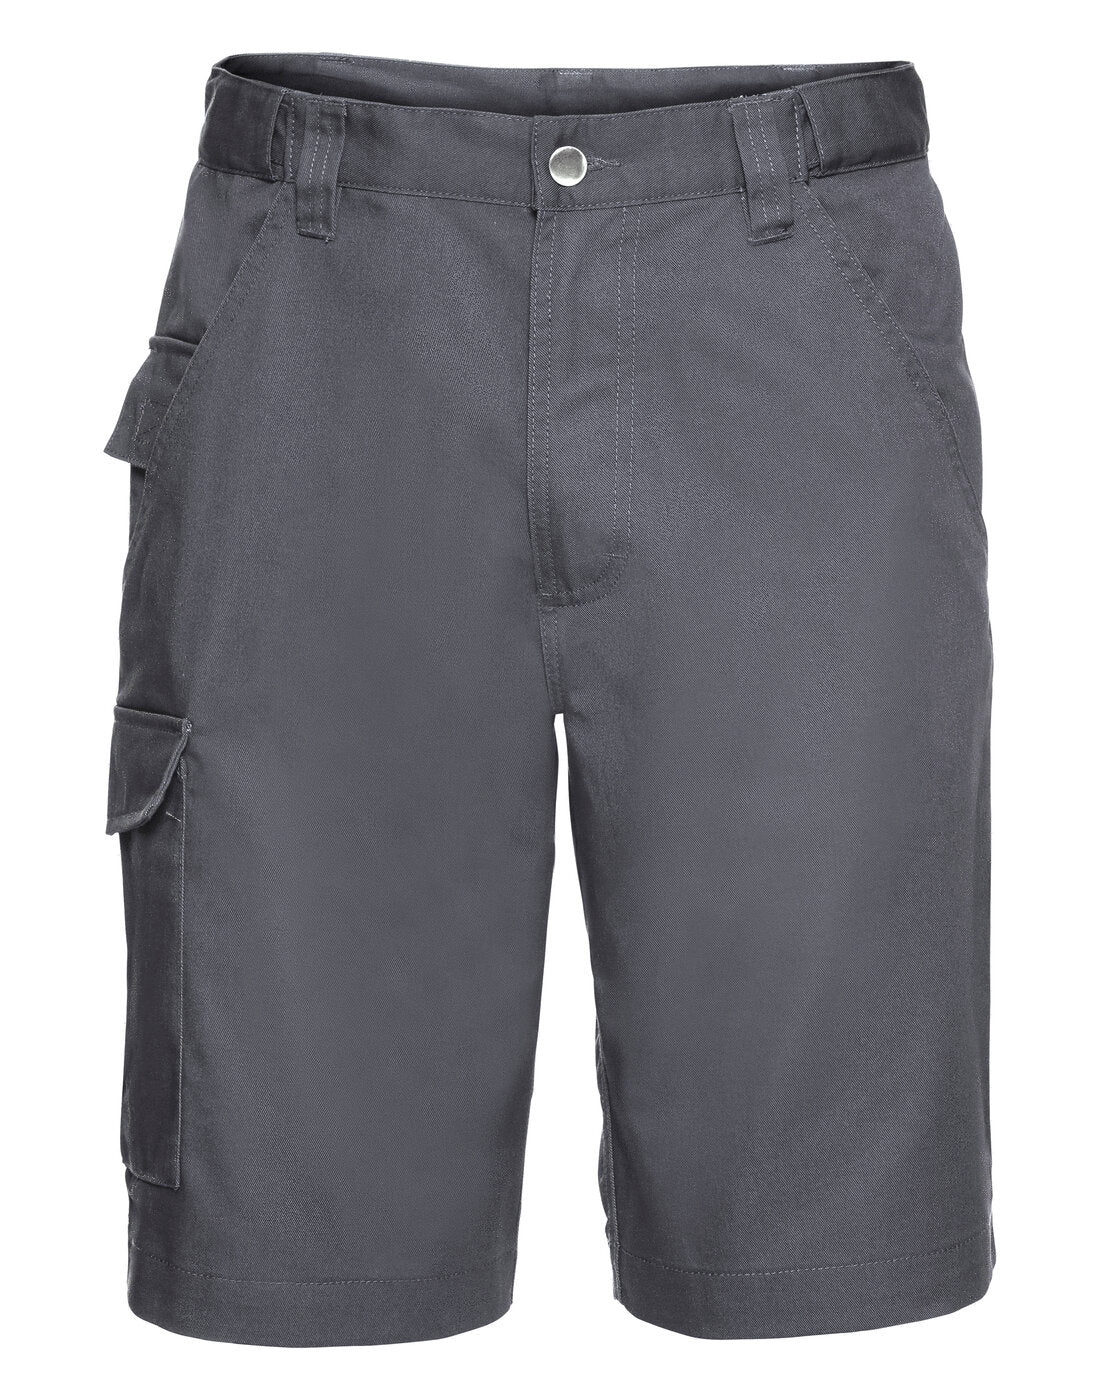 Russell Polycotton Twill Shorts - Grey